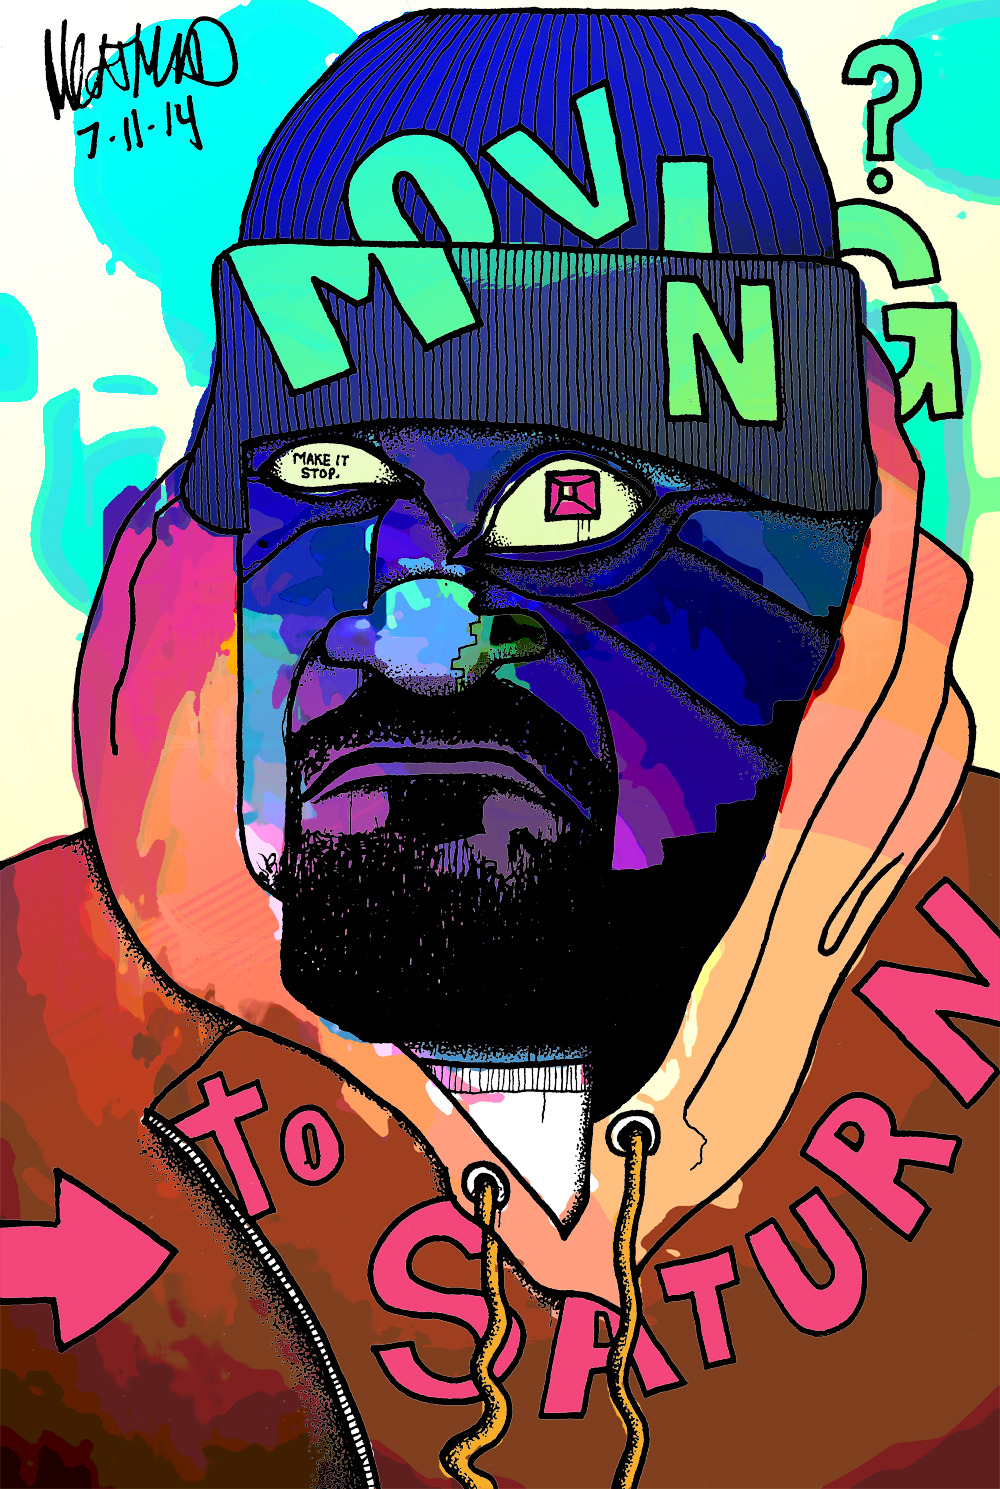 Portrait of Ghostface Killah, by Meathead
New art every day at http://meatheadsux.tumblr.com